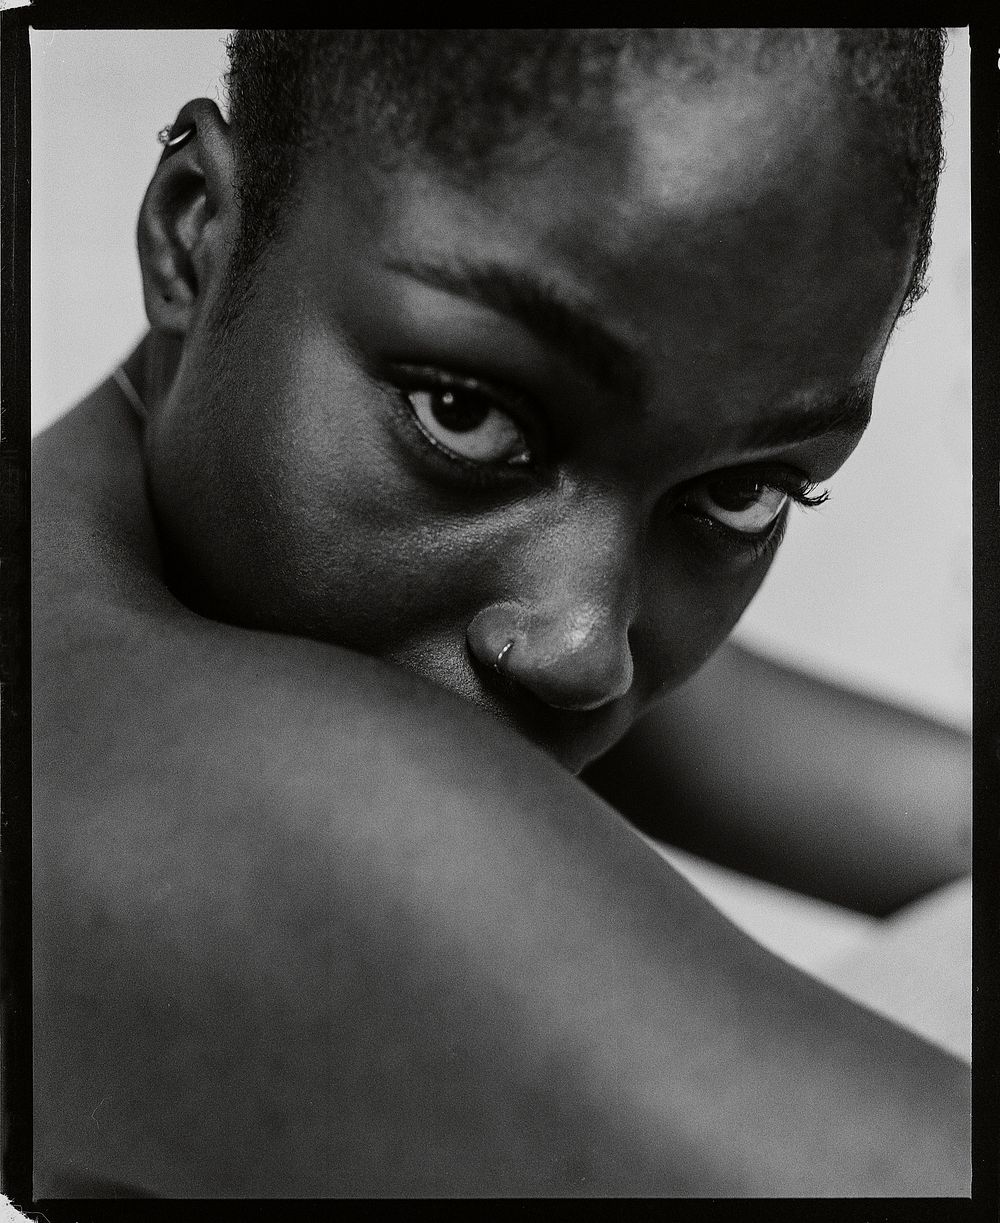 African woman looking over bare shoulder, black and white photo